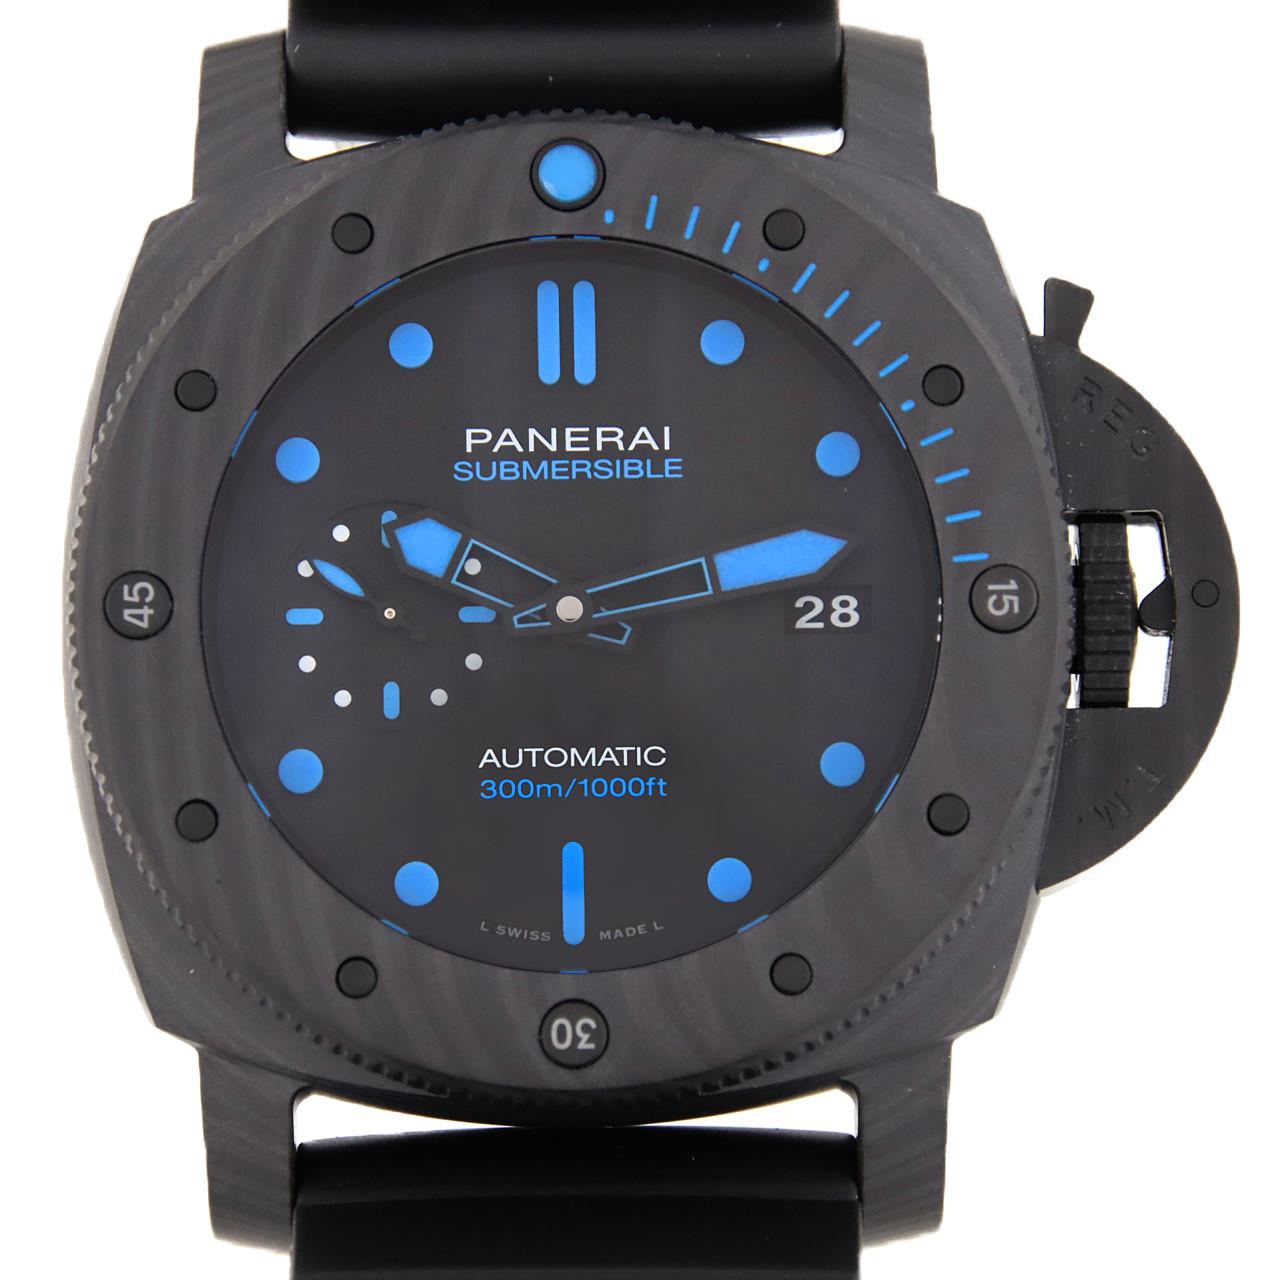 [BRAND NEW] PANERAI Submersible Carbotech PAM01616 Carbotech Automatic